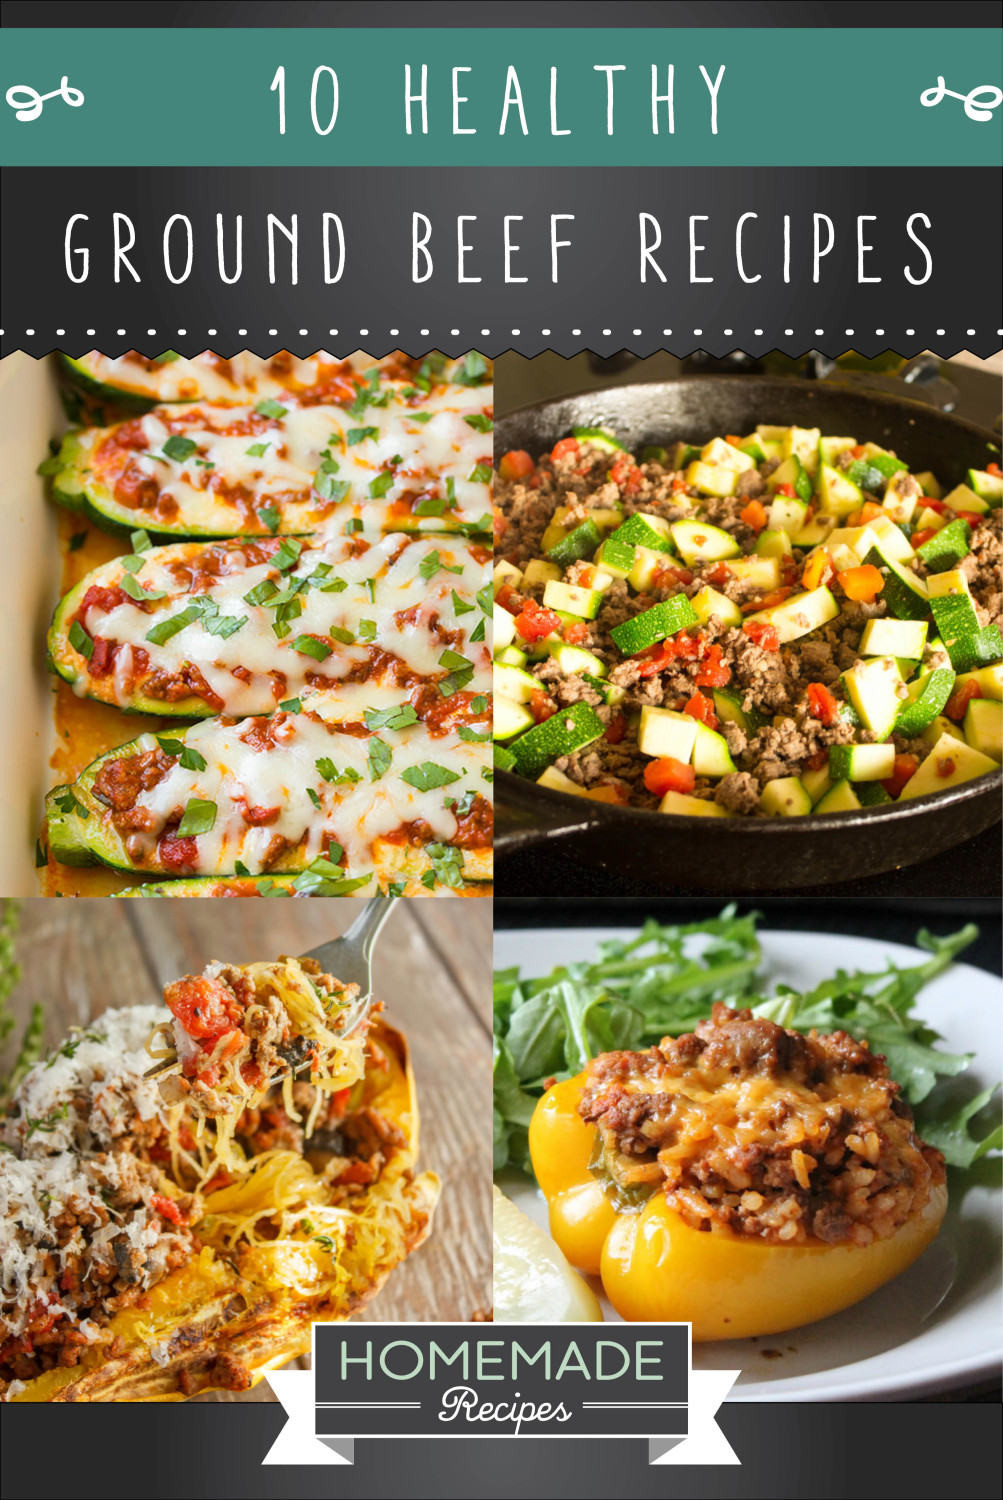 Healthy Recipes With Ground Beef
 10 Healthy Ground Beef Recipes